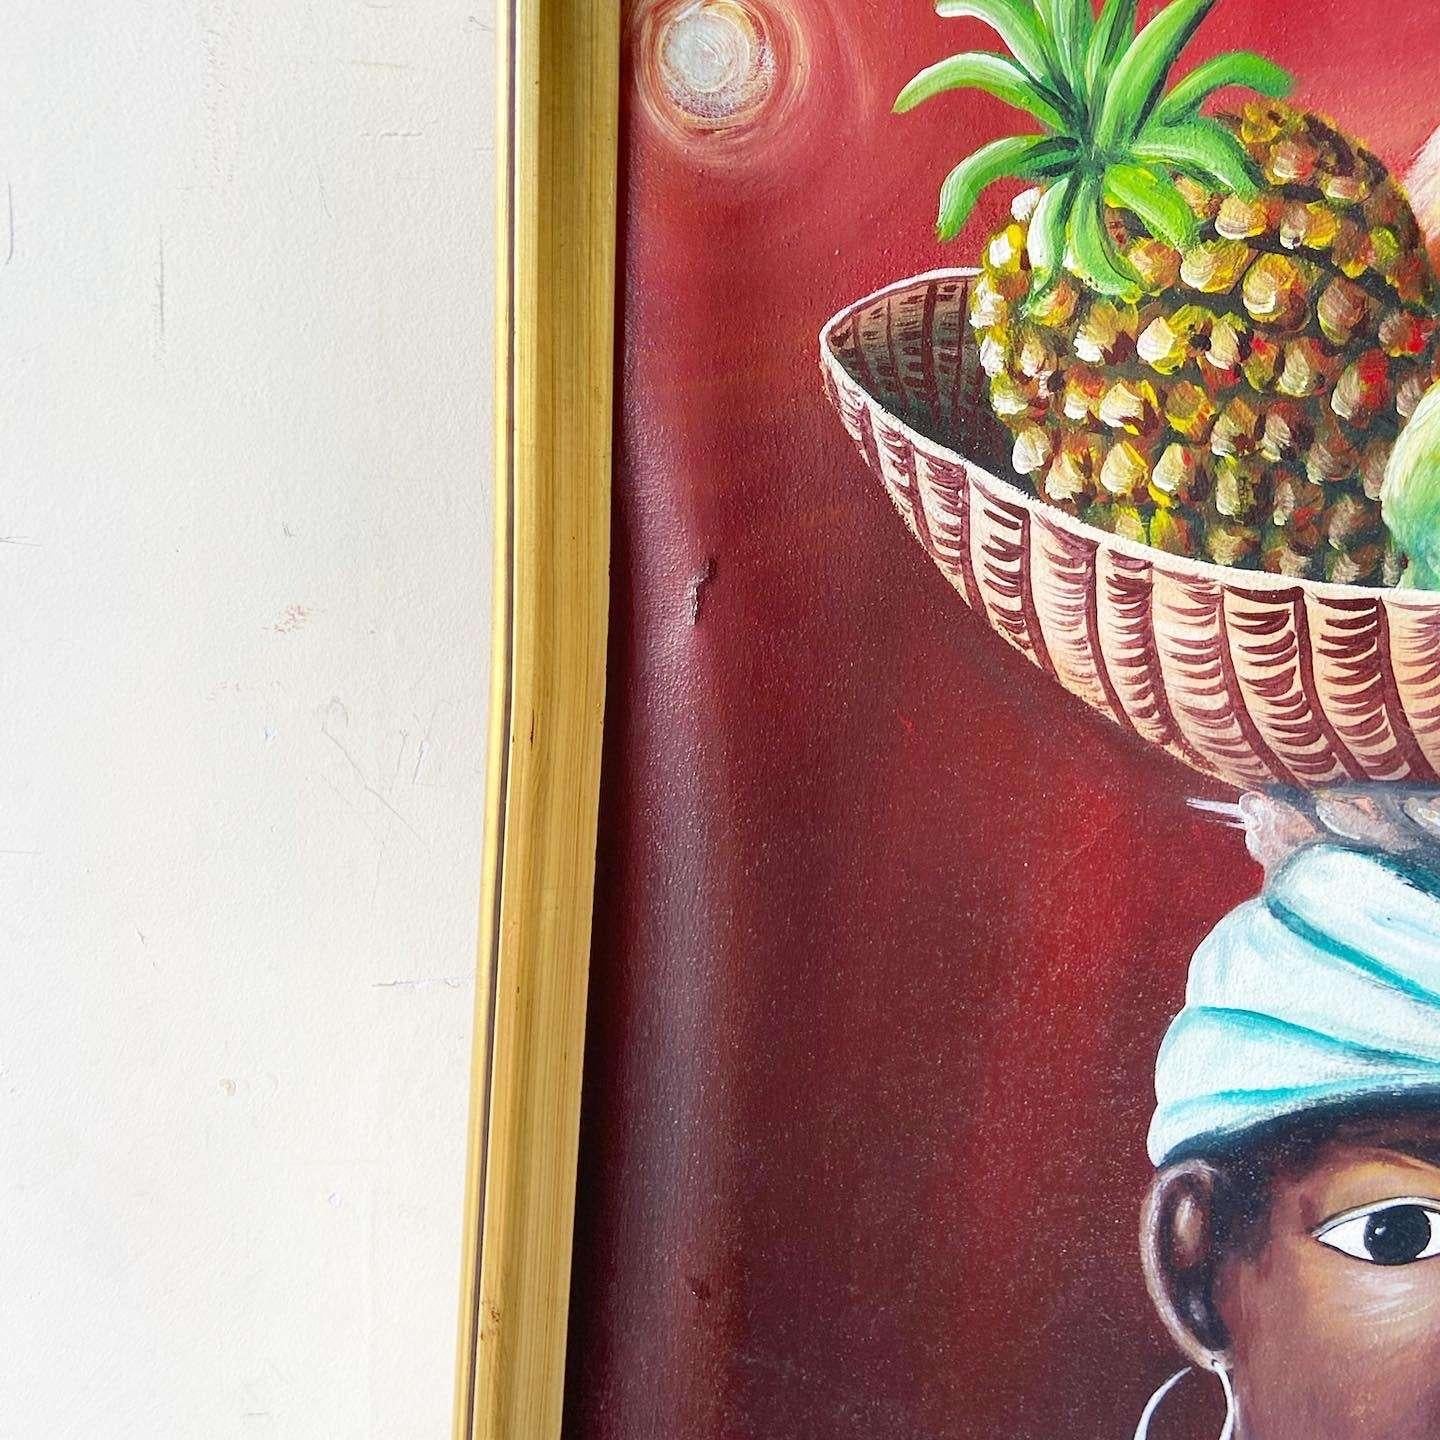 Canvas Original Framed Oil Painting of Caribbean Woman With Fruit Bowl by Scroggin